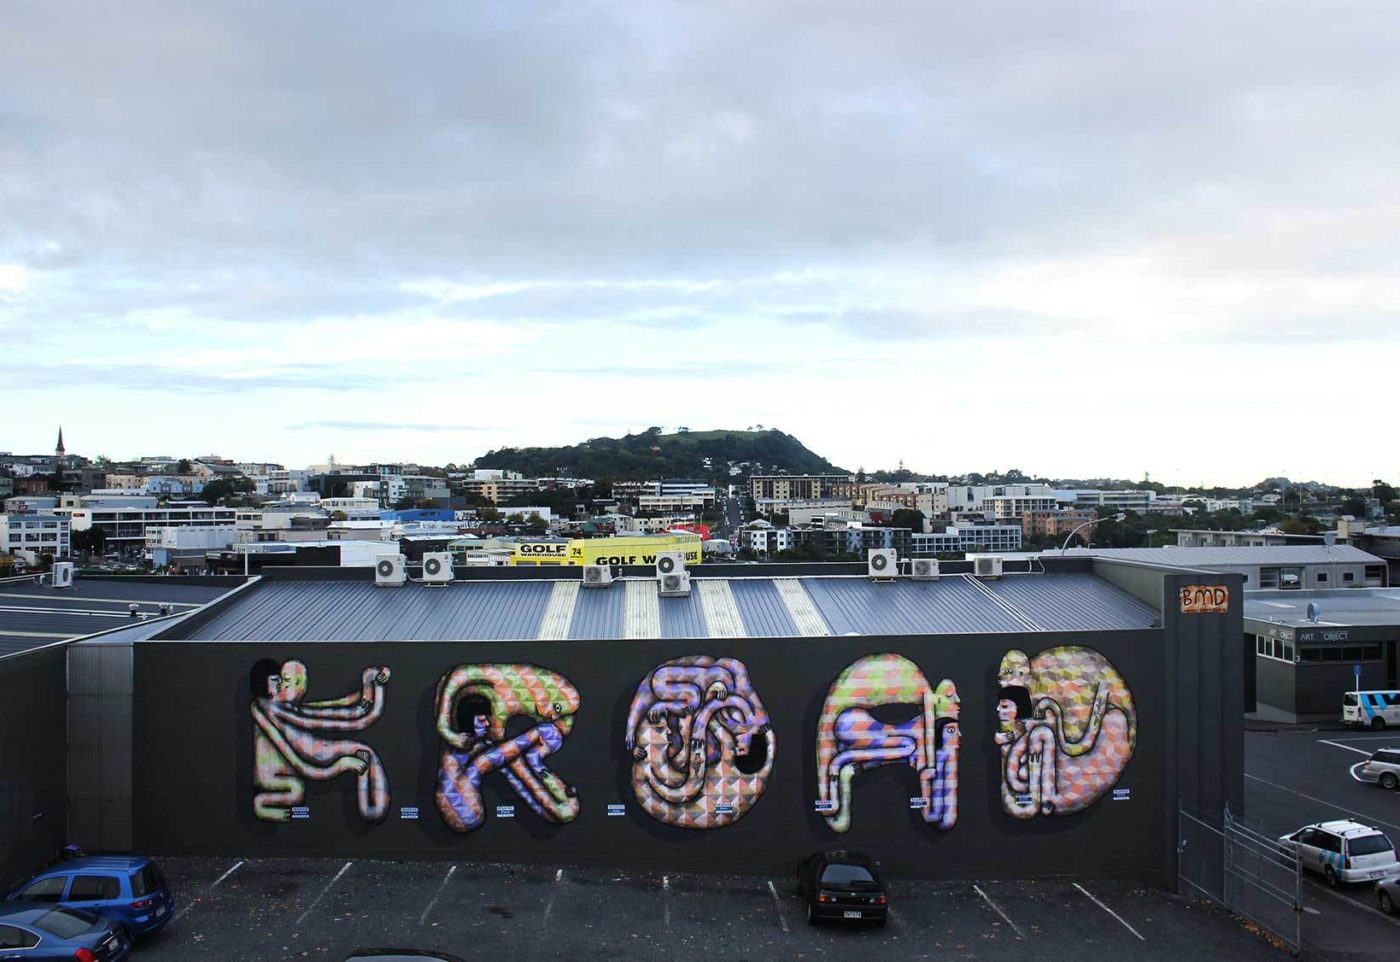 K Road Kama Sutra. Auckland, 2013. With Damin Radford Scott. Photo: Artists own